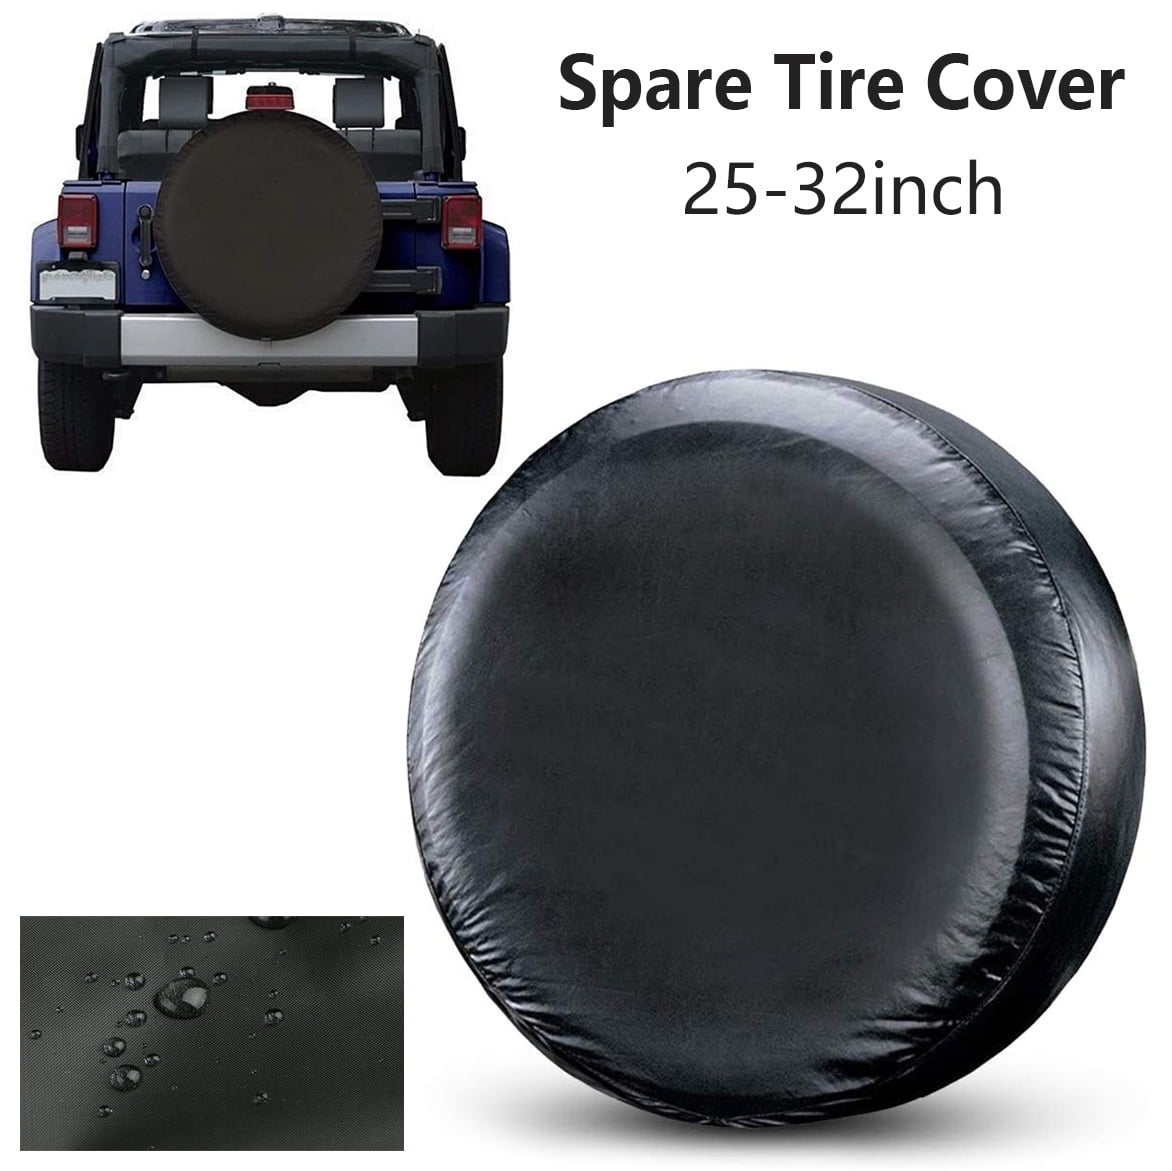 Tire Wheel Cover Oxford Waterproof UV Sun Protectors for Jeep Trailer RV SUV Camper Fits Universal Vehicle Tire Wheel Covers Diameters 24-26 inches… Car Wheel Spare Tire Covers 